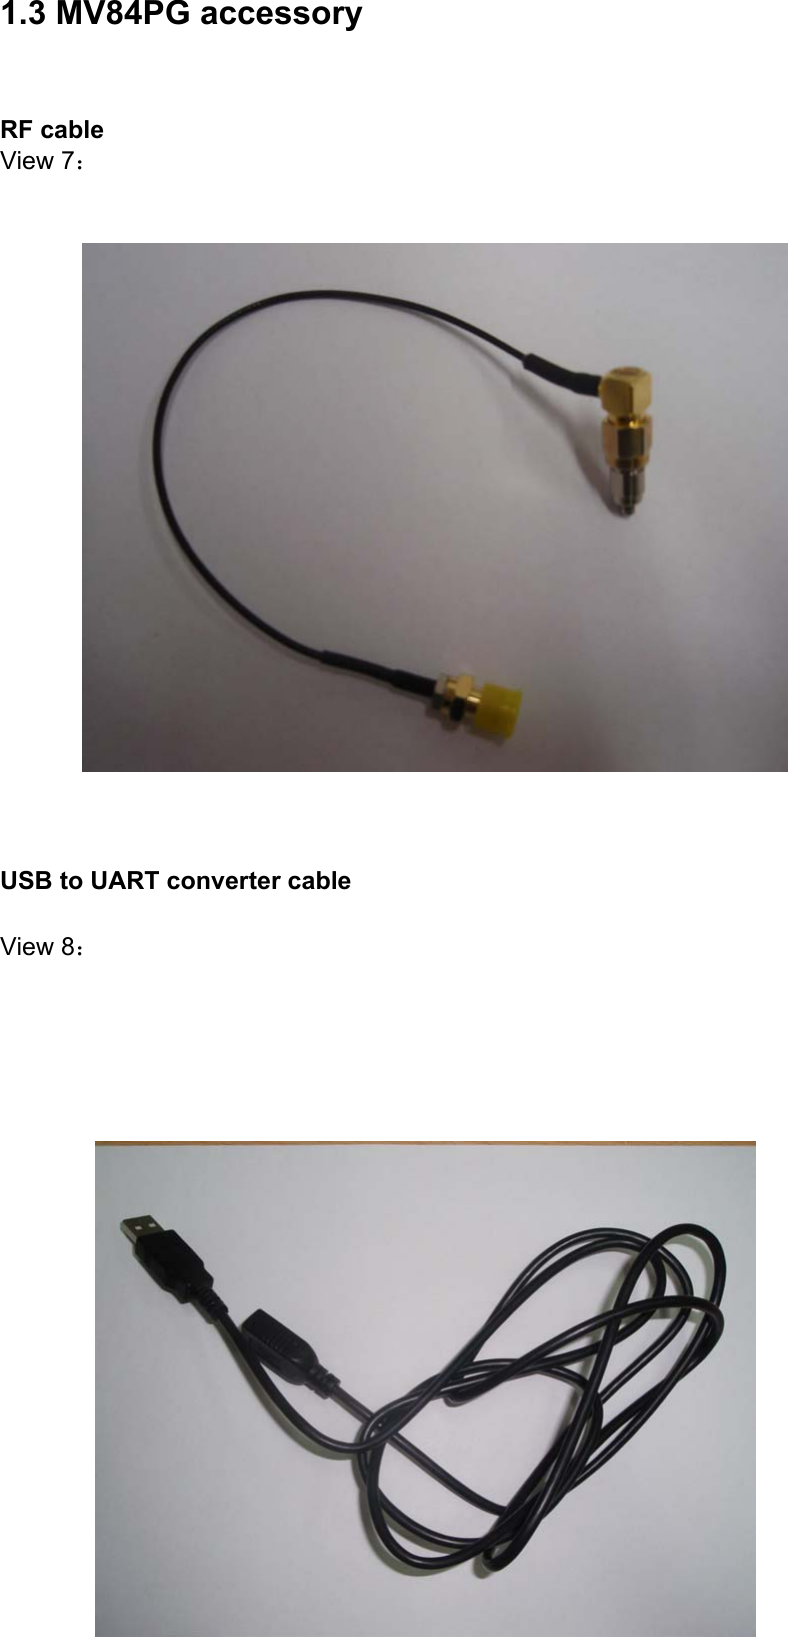 5  1.3 MV84PG accessory    RF cable     View 7：                            USB to UART converter cable View 8：            